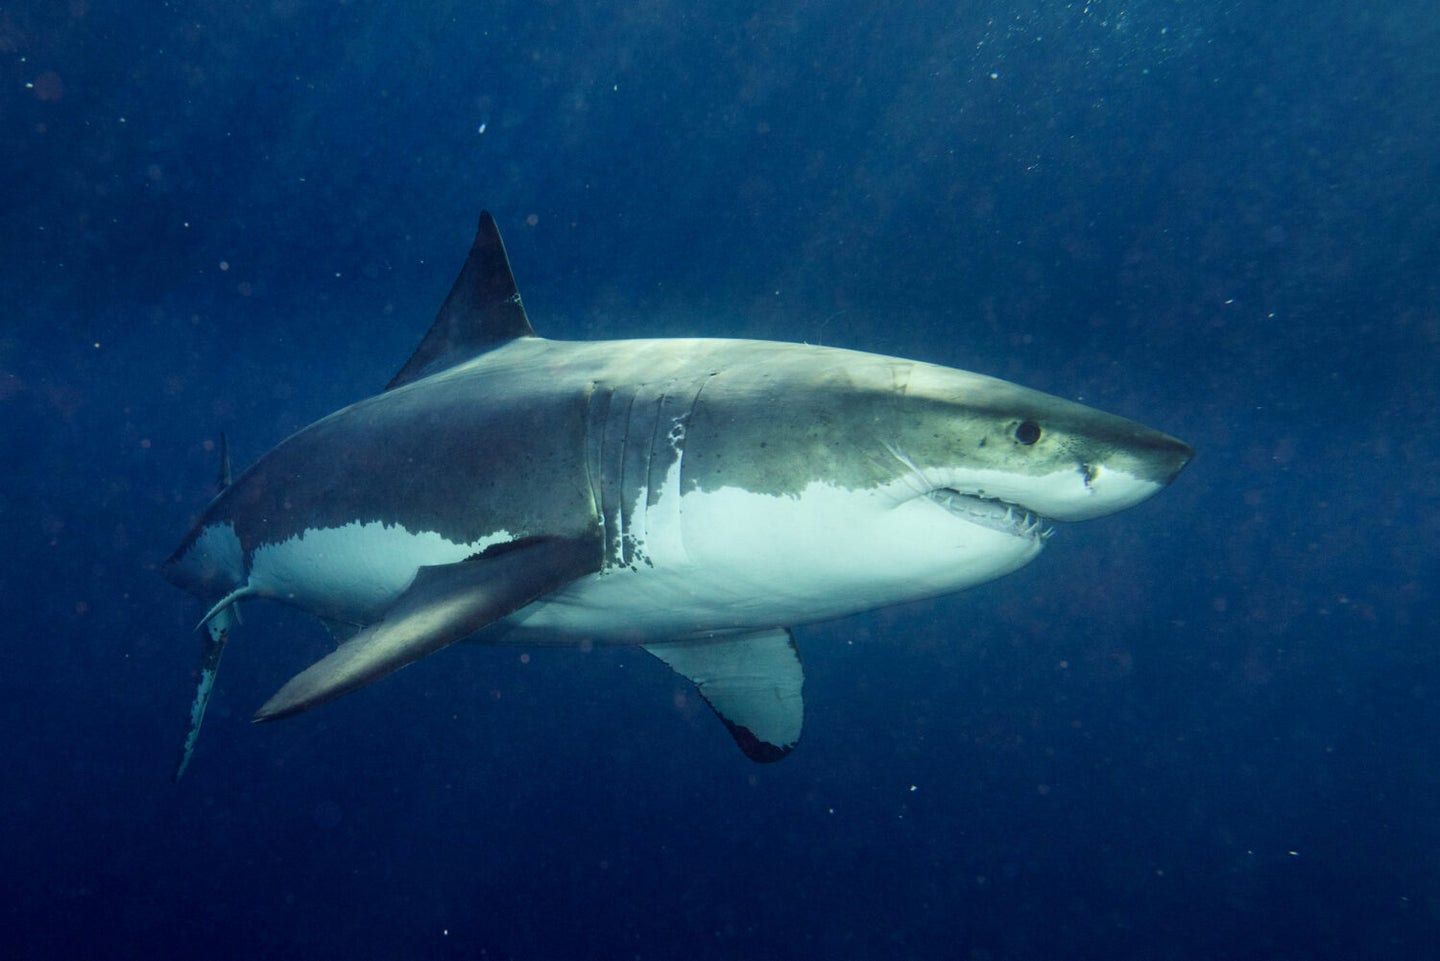 A great white shark and megalodon co-existed nearly 4 million years ago.